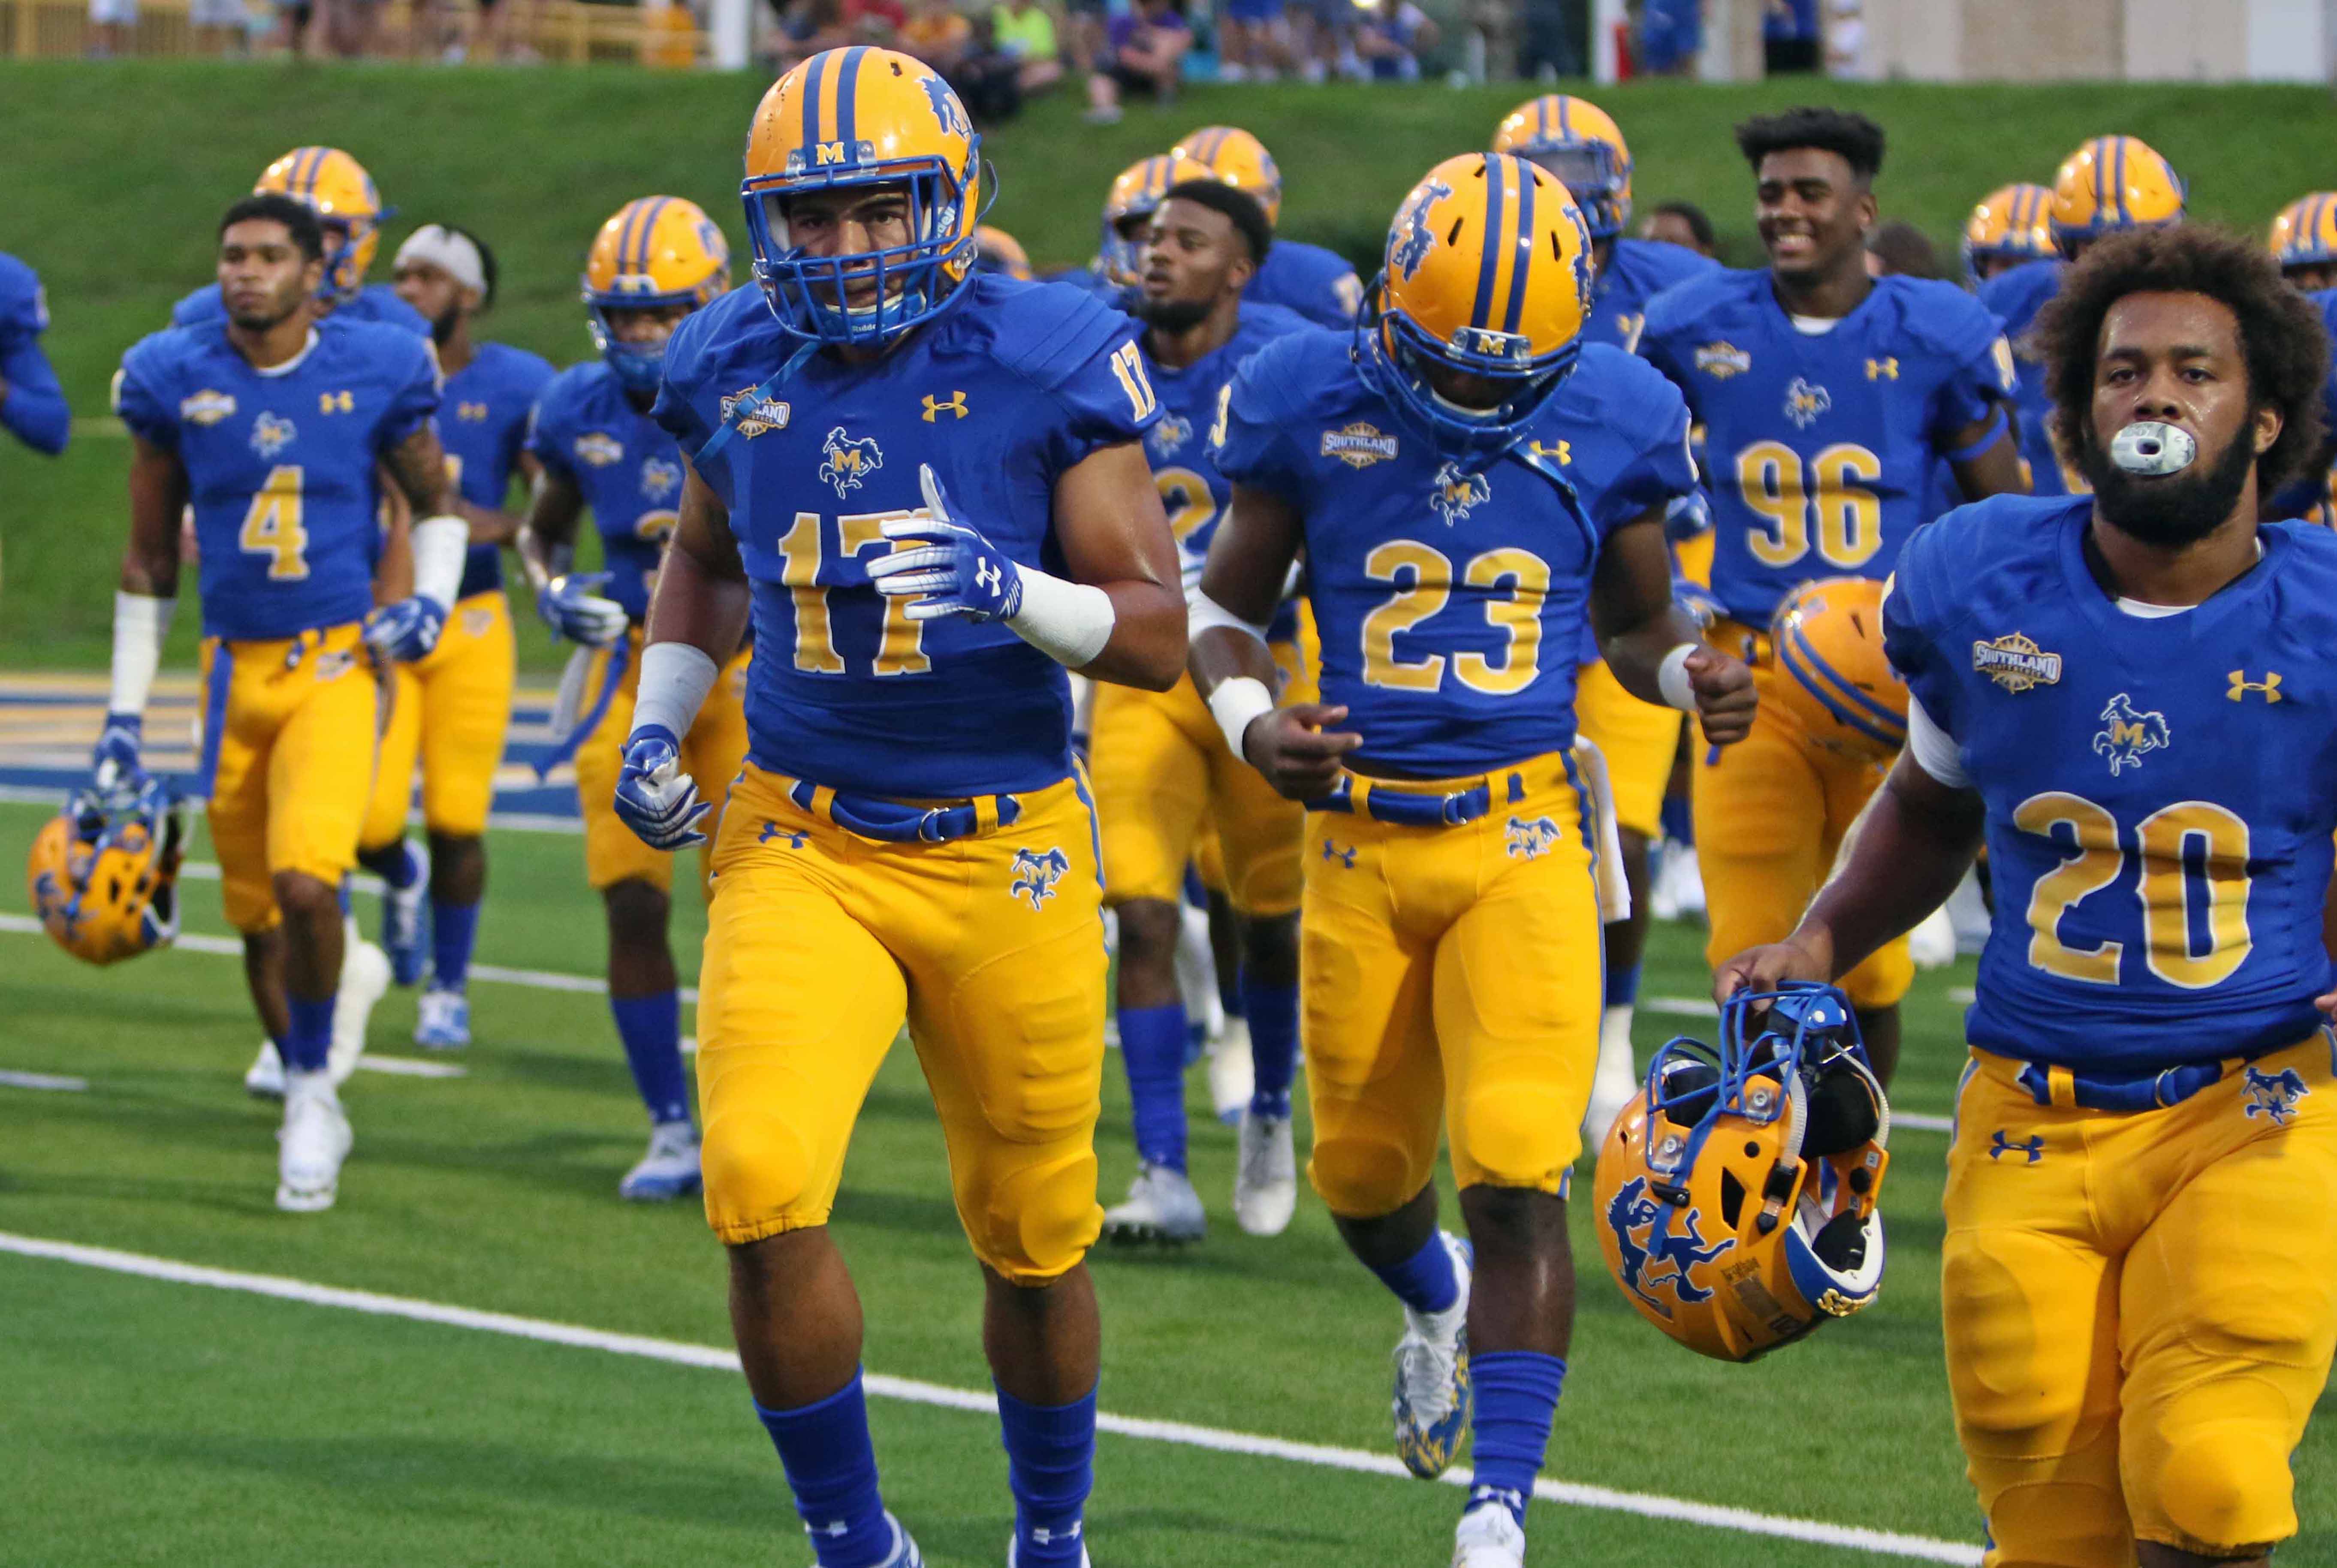 (4-1) McNeese State Wins Against (1-3) SFA 17-10